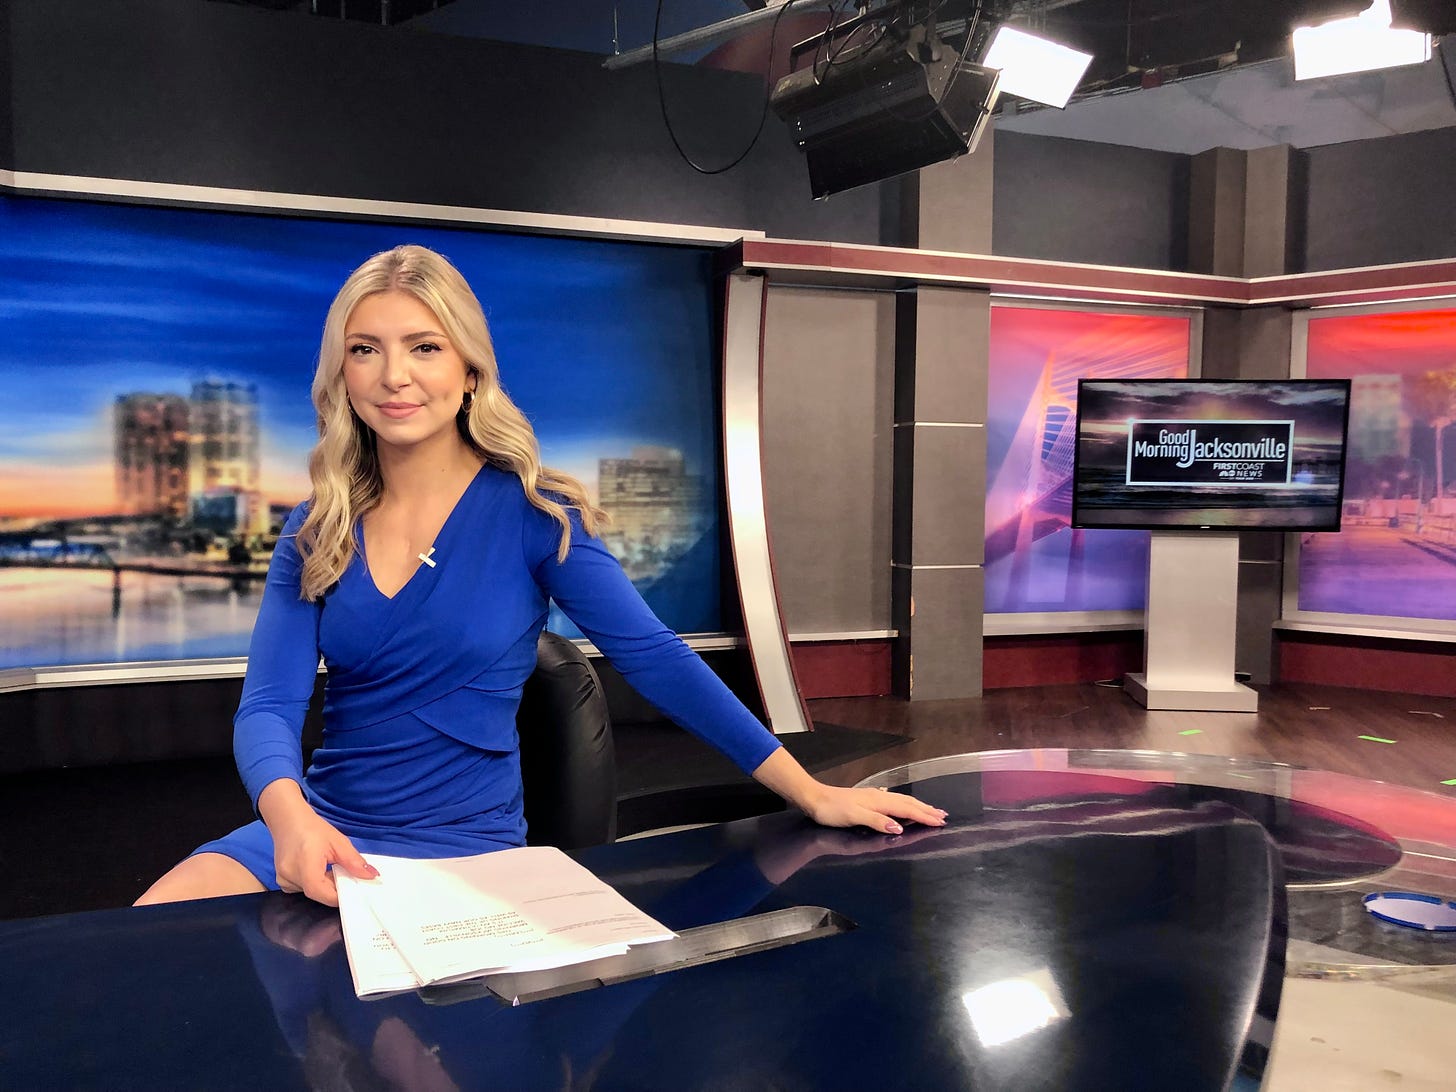 A blonde woman in a blue V-neck dress sits at a television anchor desk. A faint scar is visible on her chest.